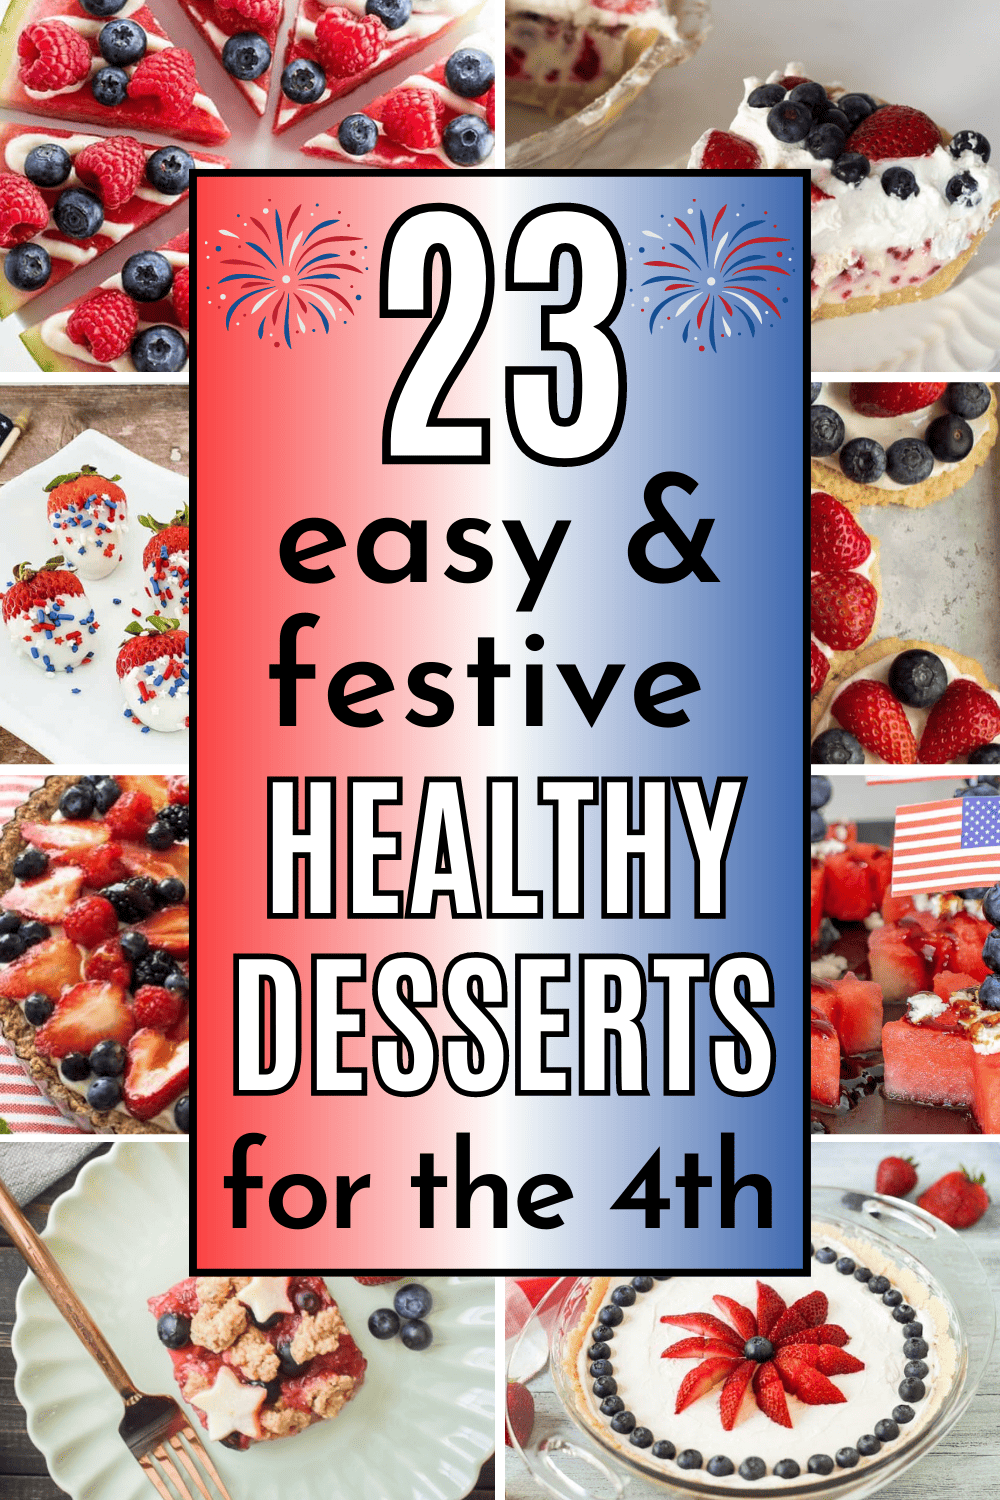 These healthy 4th of July desserts are easy to make for a crowd, and super pretty on the table! Low calorie, vegan, gluten free, or sugar free, you'll love these easy healthy Fourth of July food recipes. Healthy 4th of july food ideas, easy healthy dessert recipes quick, quick healthy dessert recipes, healthy 4th of july desserts for a crowd, healthy 4th of july desserts gluten free, healthy vegan desserts easy, healthy 4th of july desserts vegan no sugar, healthy vegan desserts clean eating